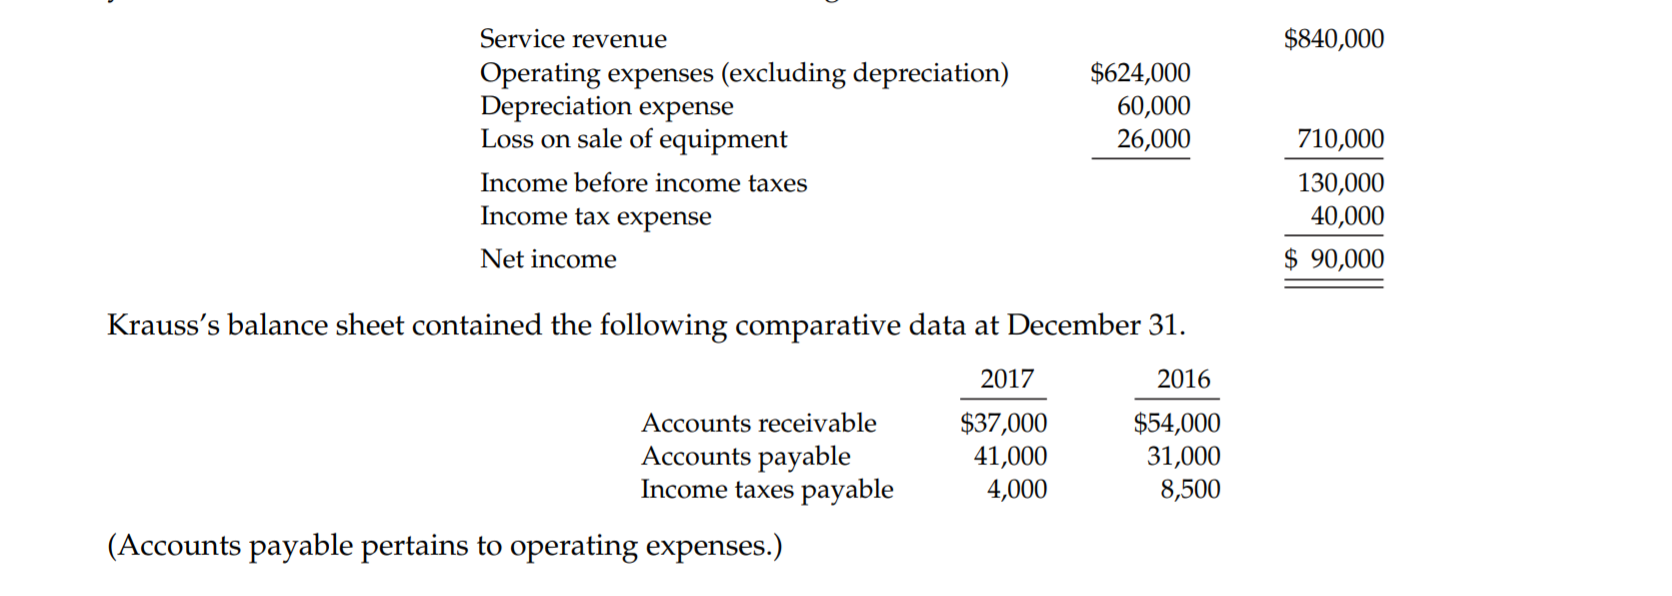 Service revenue
$840,000
Operating expenses (excluding depreciation)
Depreciation expense
Loss on sale of equipment
$624,000
60,000
26,000
710,000
Income before income taxes
130,000
Income tax expense
40,000
Net income
$ 90,000
Krauss's balance sheet contained the following comparative data at December 31.
2017
2016
$37,000
41,000
4,000
$54,000
31,000
8,500
Accounts receivable
Accounts payable
Income taxes payable
(Accounts payable pertains to operating expenses.)
